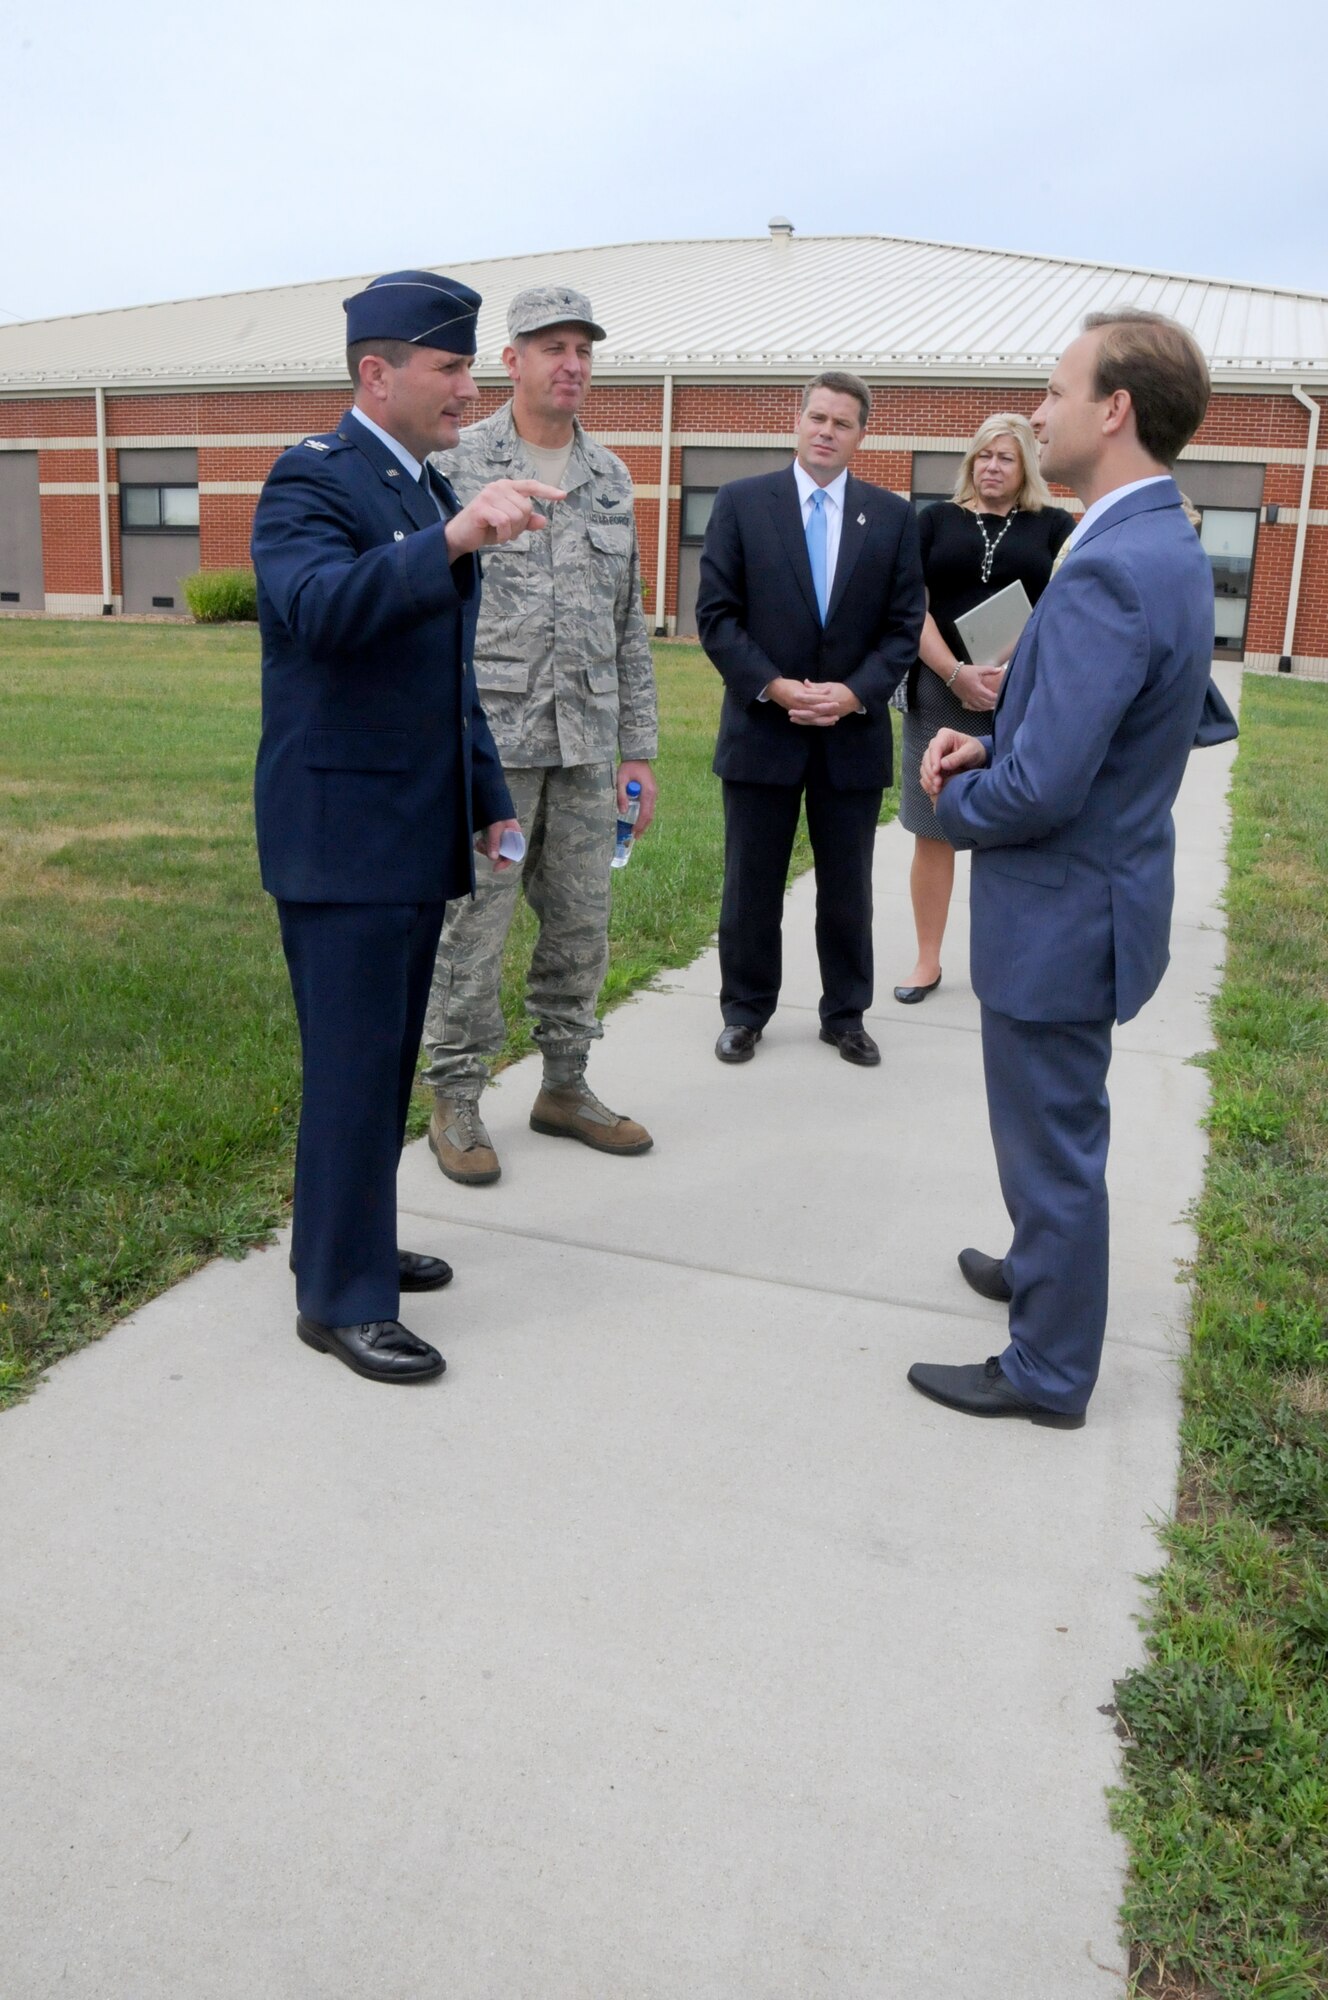 Lt. Gov. Brian Calley visits the 110th Attack Wing, Battle Creek Air National Guard Base and Fort Custer Training Center, Battle Creek, Mich., Monday, August 16, 2016. Lt. Gov. Calley met with 110th Attack Wing Commander, Col. Bryan Teff before traveling to Fort Custer Training Center to meet with Installation Commander, Lt. Col. Steve Wilson and Assistant Adjutant General of Installations, Brig. Gen. Michael Stone.  The purpose of Cally's visit was to highlight the state's strategic plan to protect and grow Michigan's defense and homeland security economy. After returning to the 110th, Calley toured the facilities stopping at the 217th Air Operations Group for a Cyber Operations Squadron mission brief and press conference with Wing Commander, Col. Bryan Teff, Battle Creek Area Chamber of Commerce Representative, Military Affairs, Mr. T.R. Shaw,  and Battle Creek Unlimited Interim President and CEO, Mr. Joe Sobieralski. (Air National Guard photo by Master Sgt. Sonia Pawloski/released)